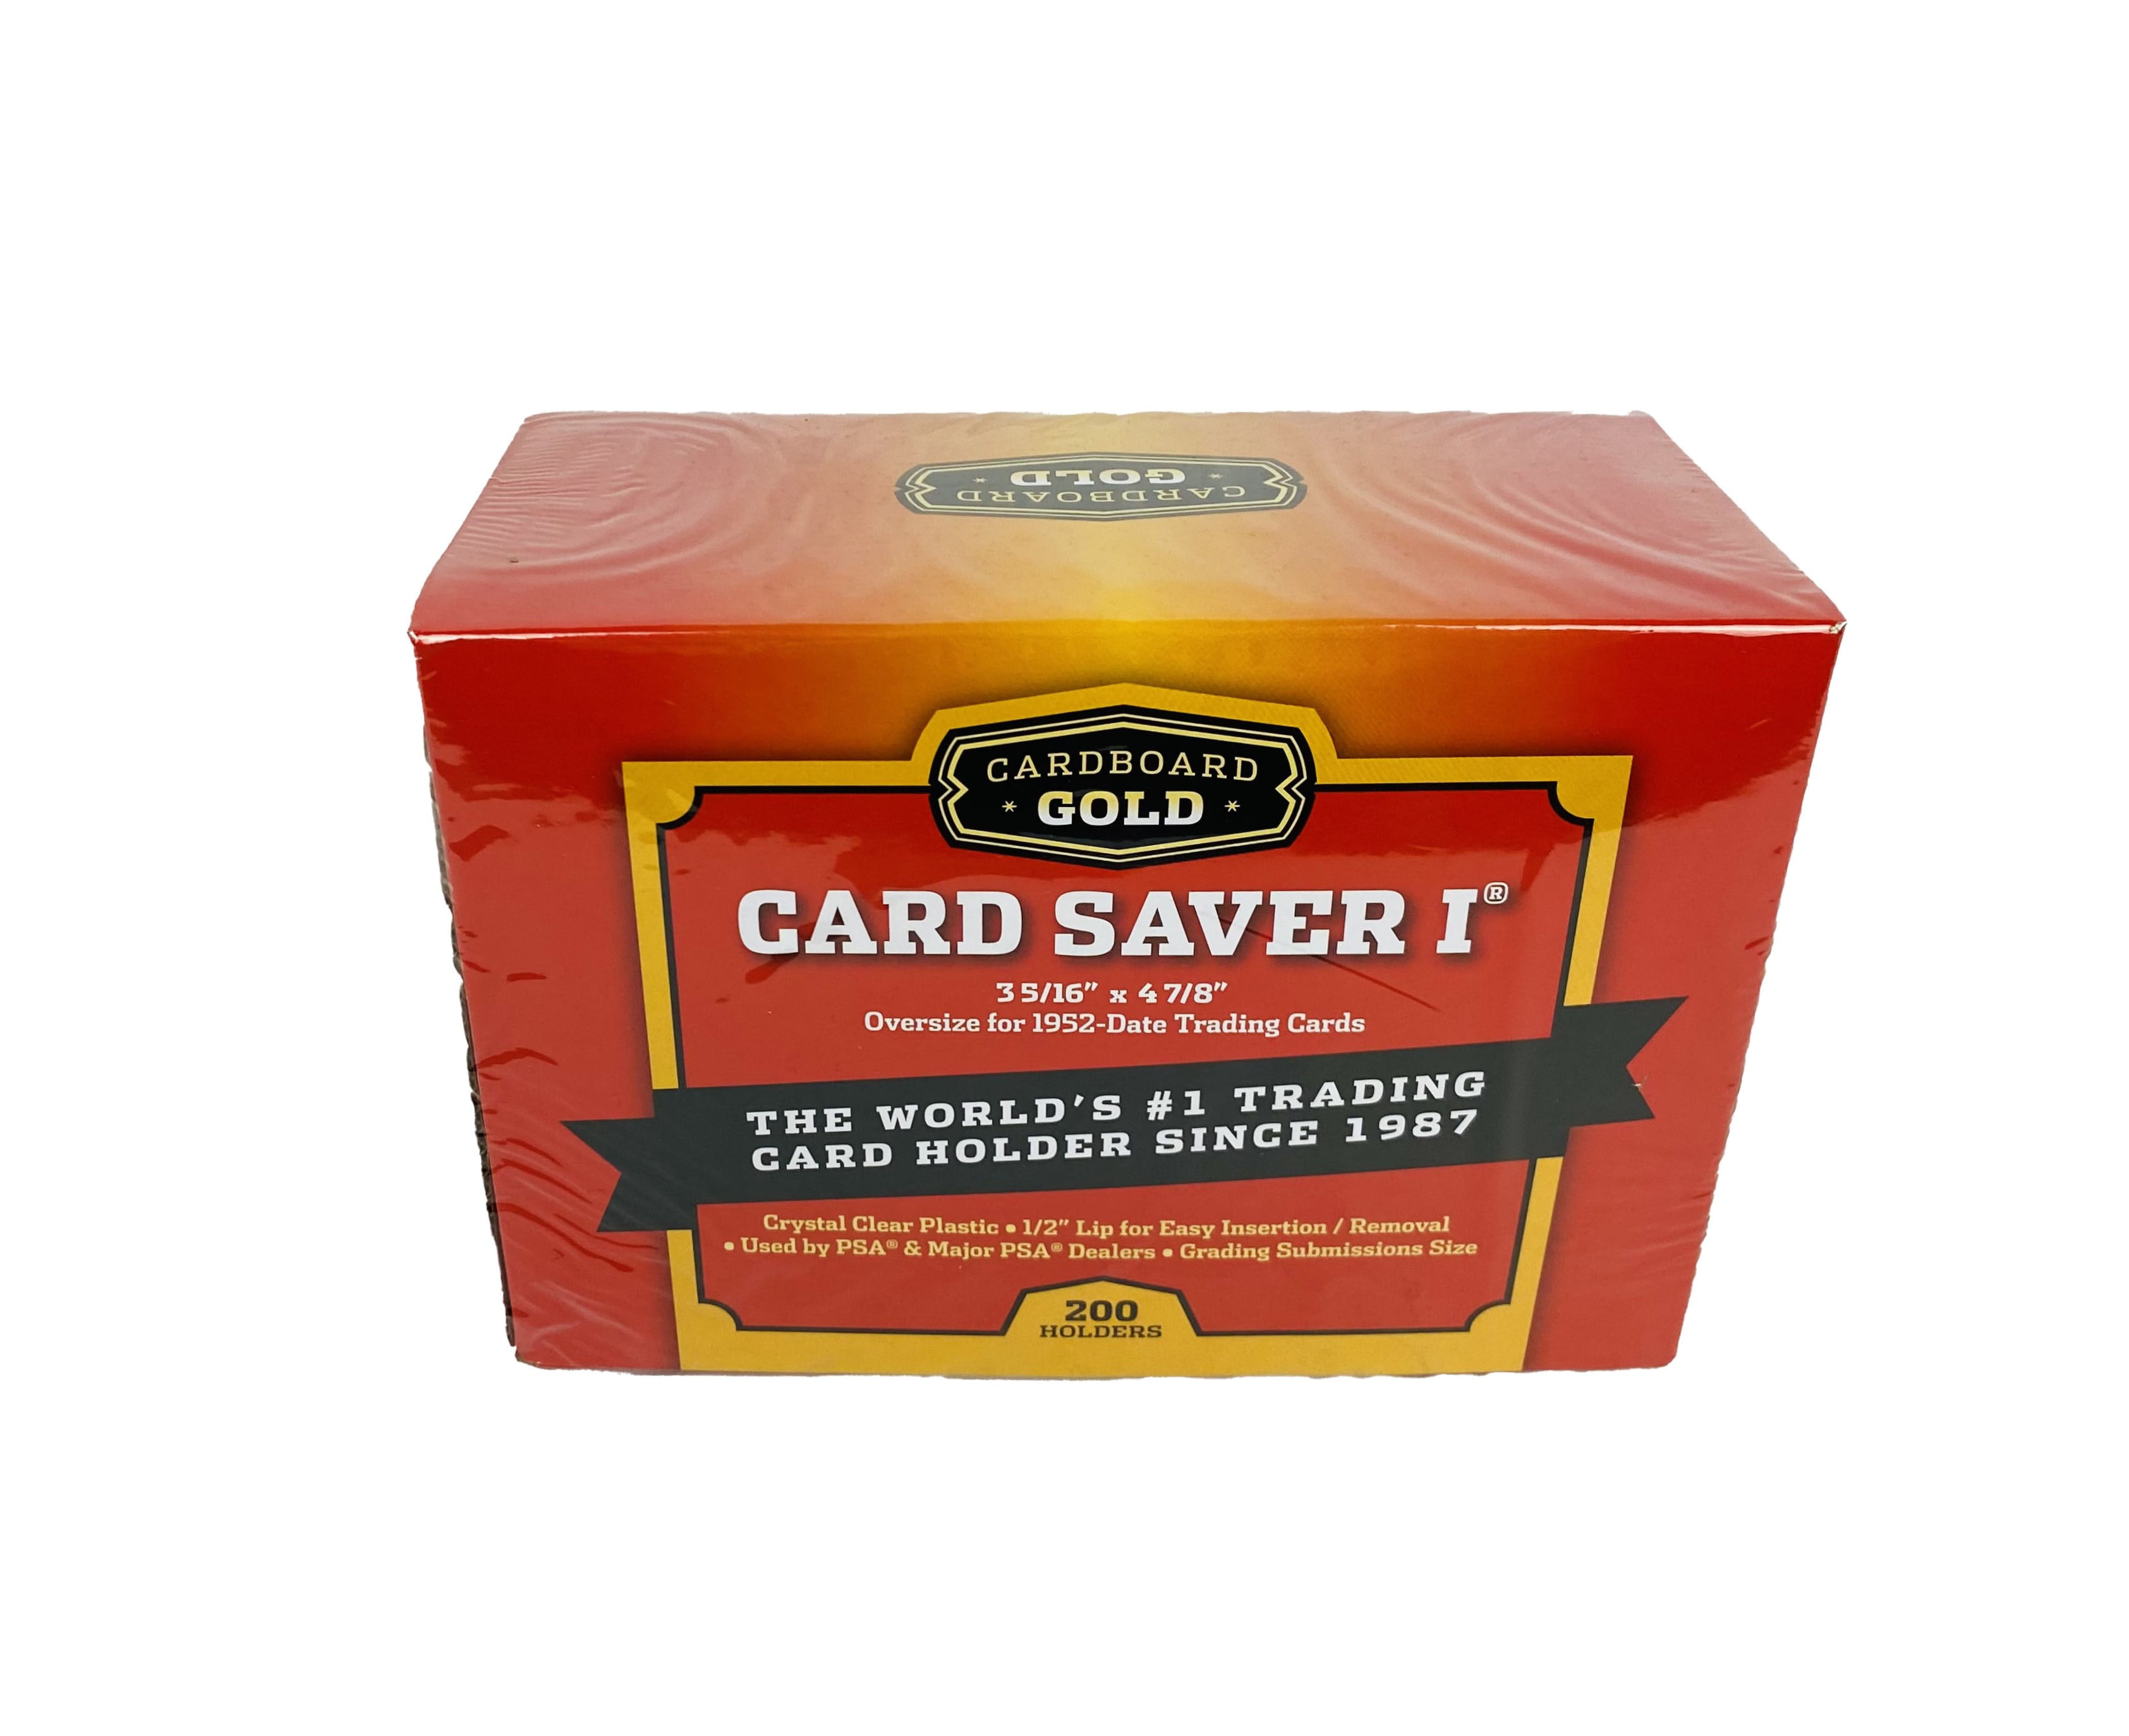  Card Saver 1 By Cardboard Gold - PSA Recommended